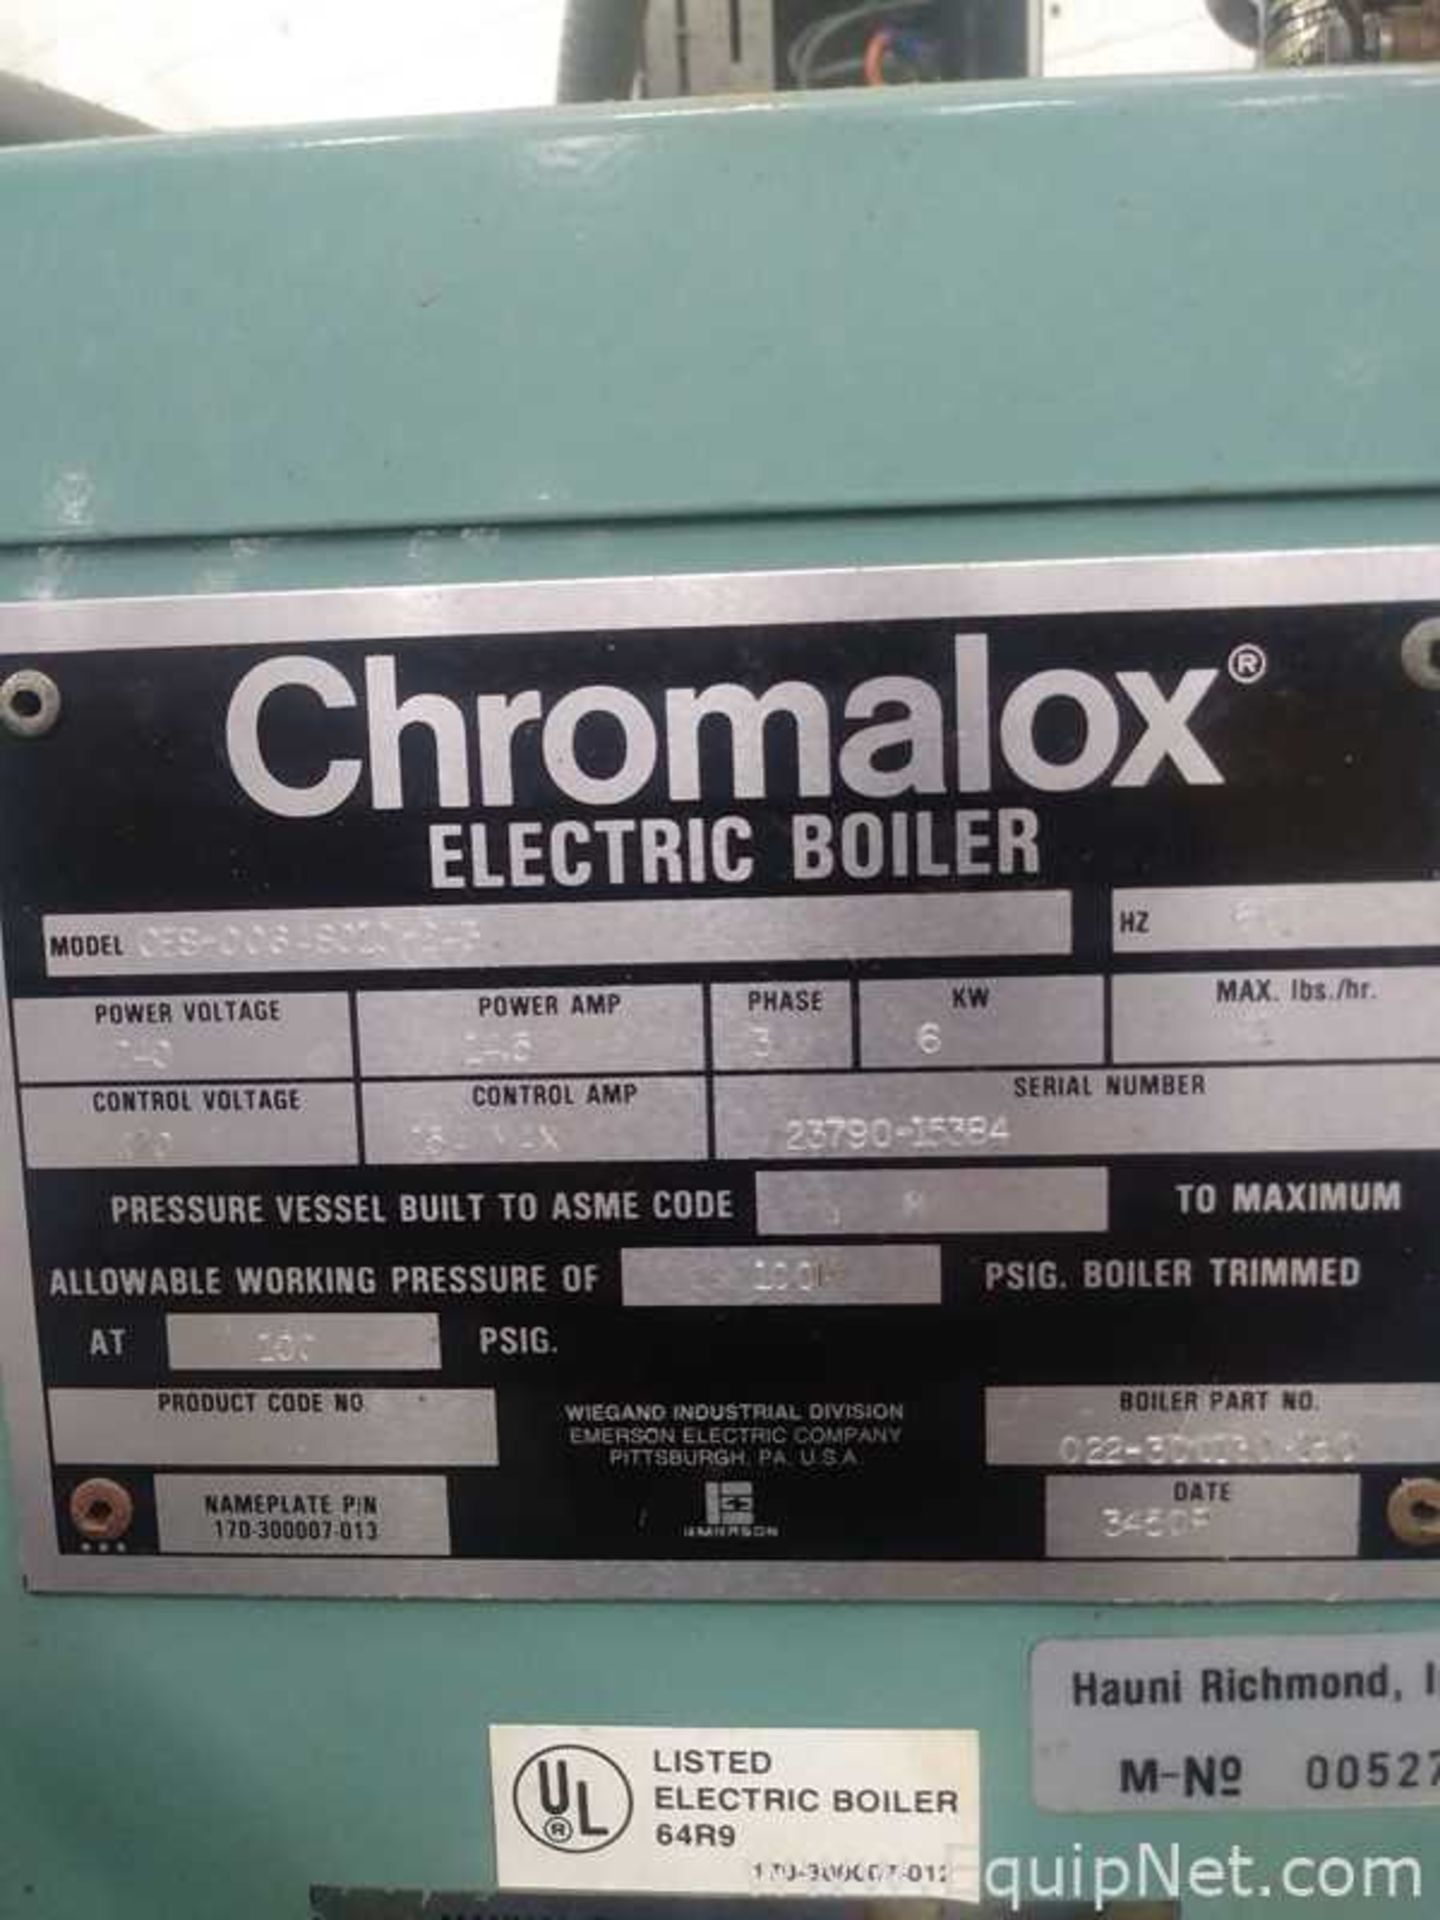 Chromalox CES-6 Electric Boiler - Image 7 of 7